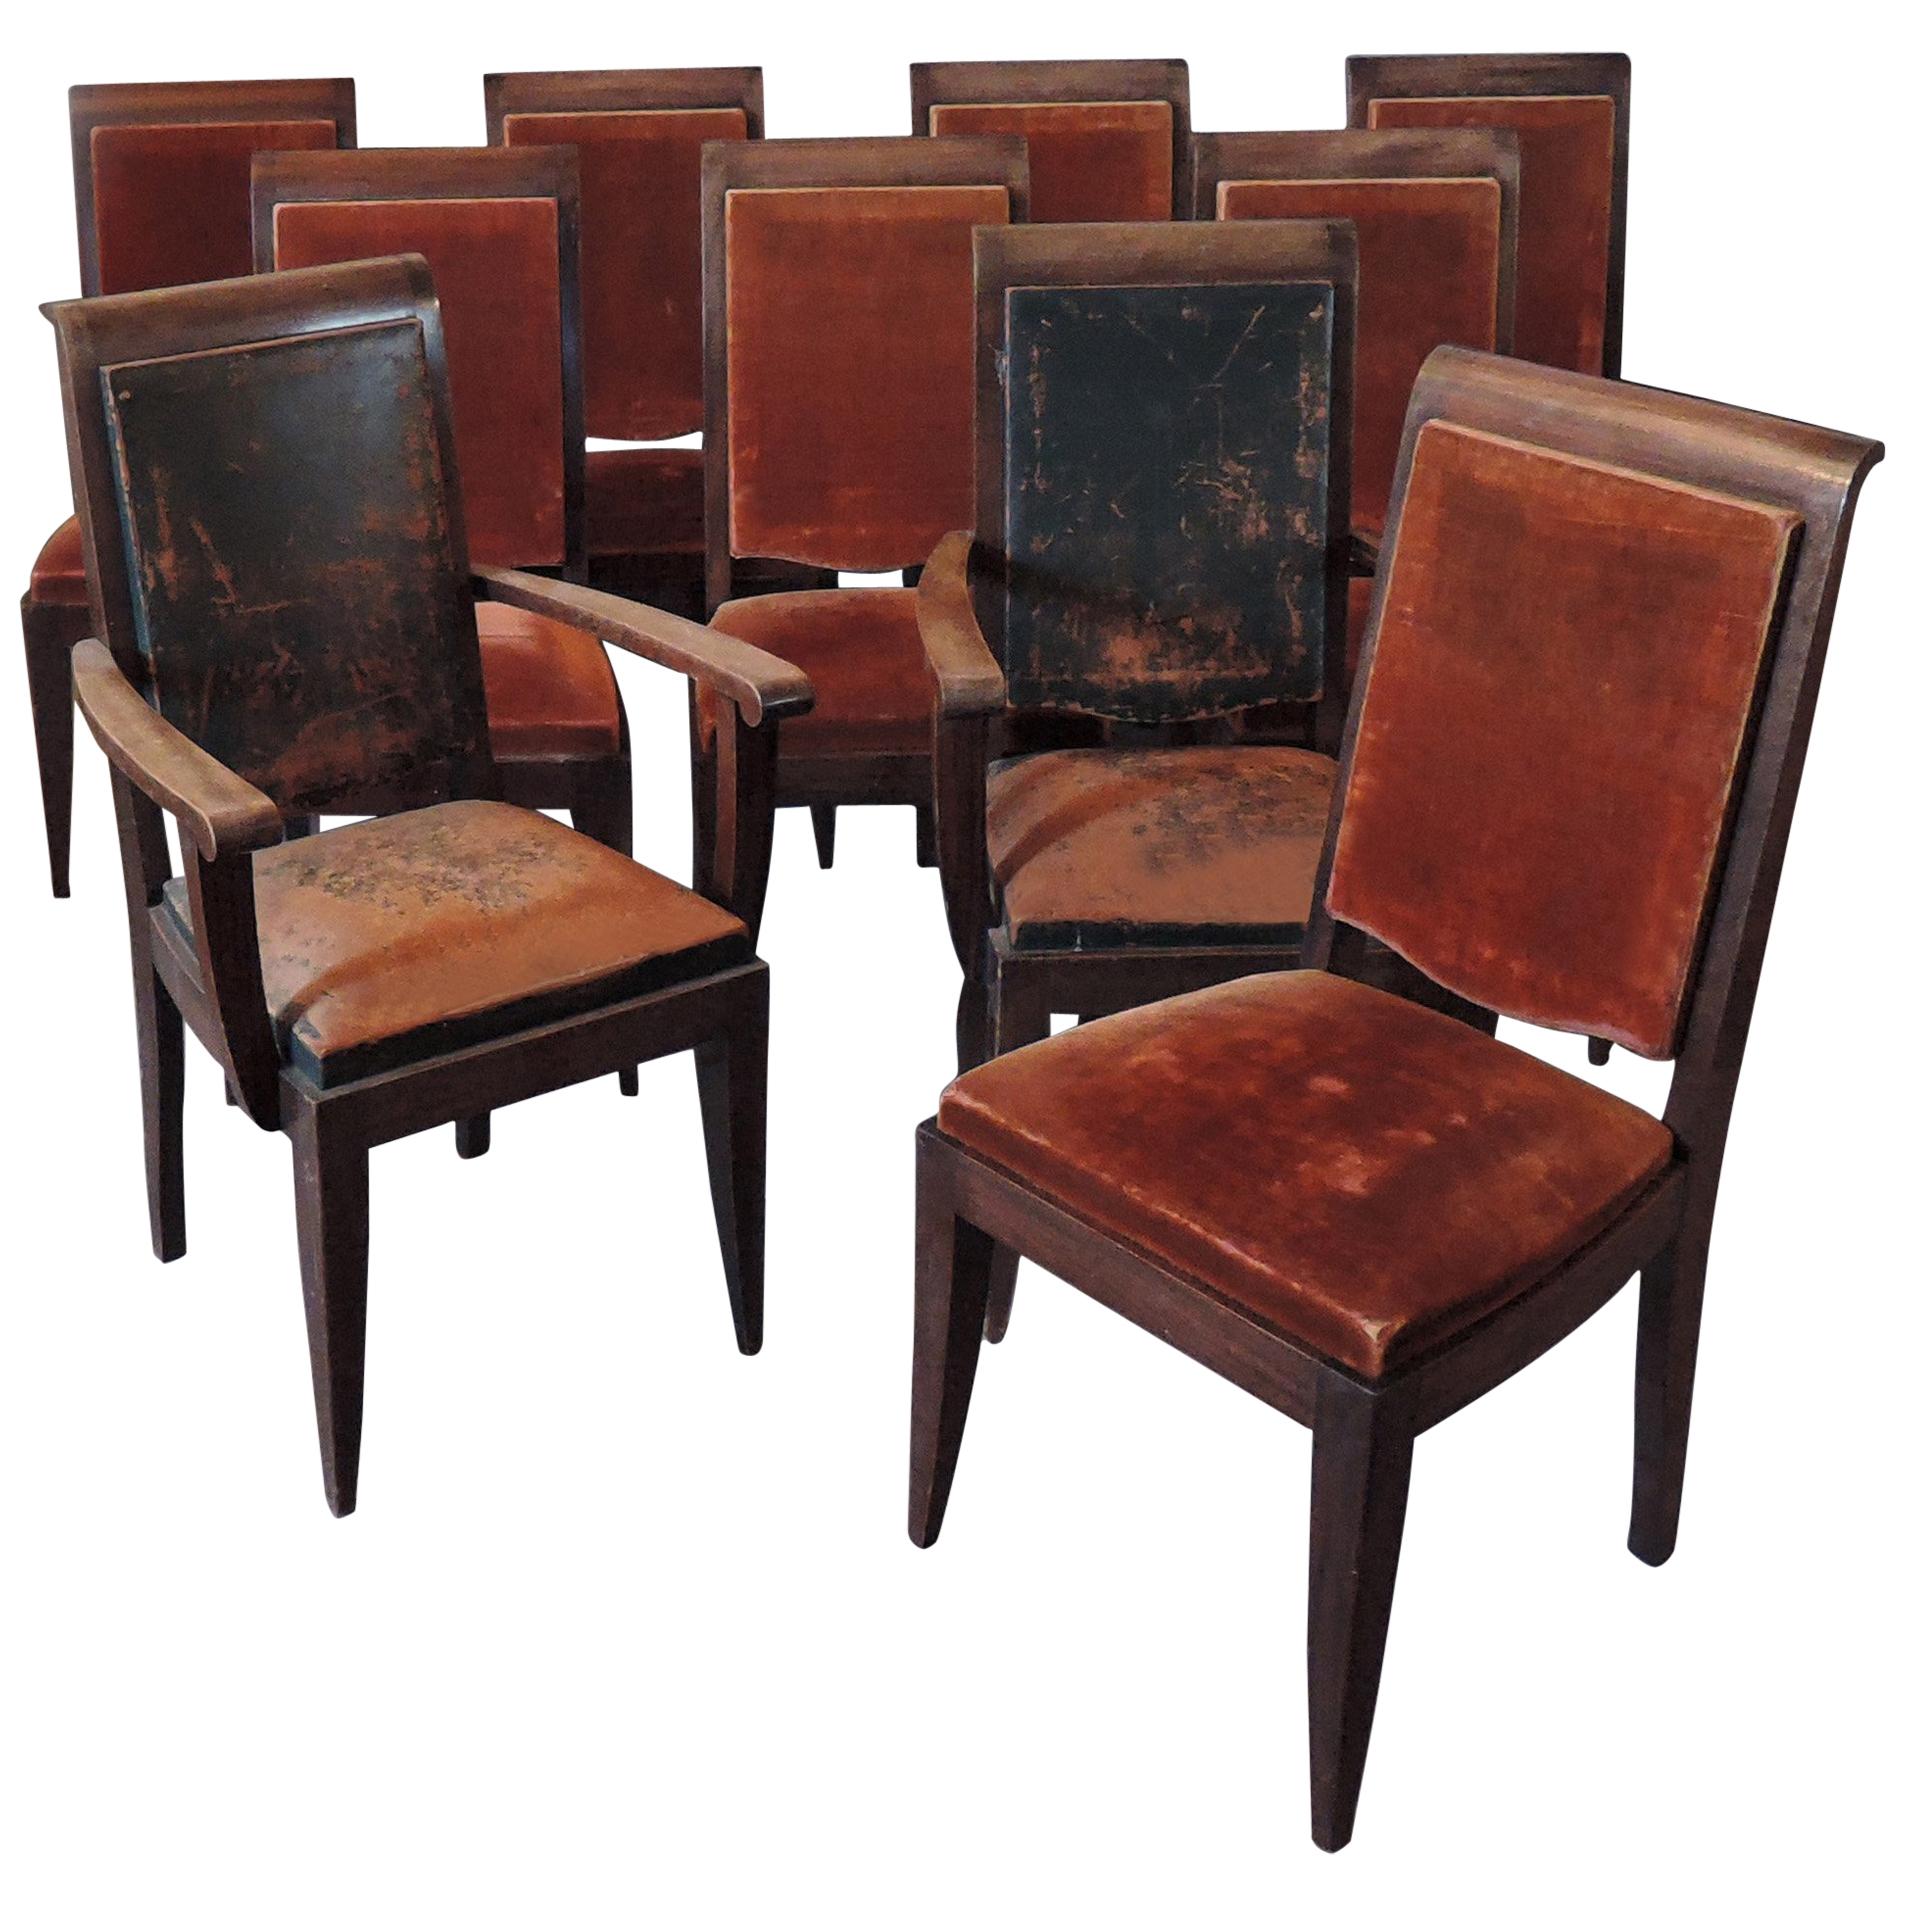 Set of 10 French Art Deco Mahogany Chairs by Gaston Poisson '8 Side and 2 Arm'